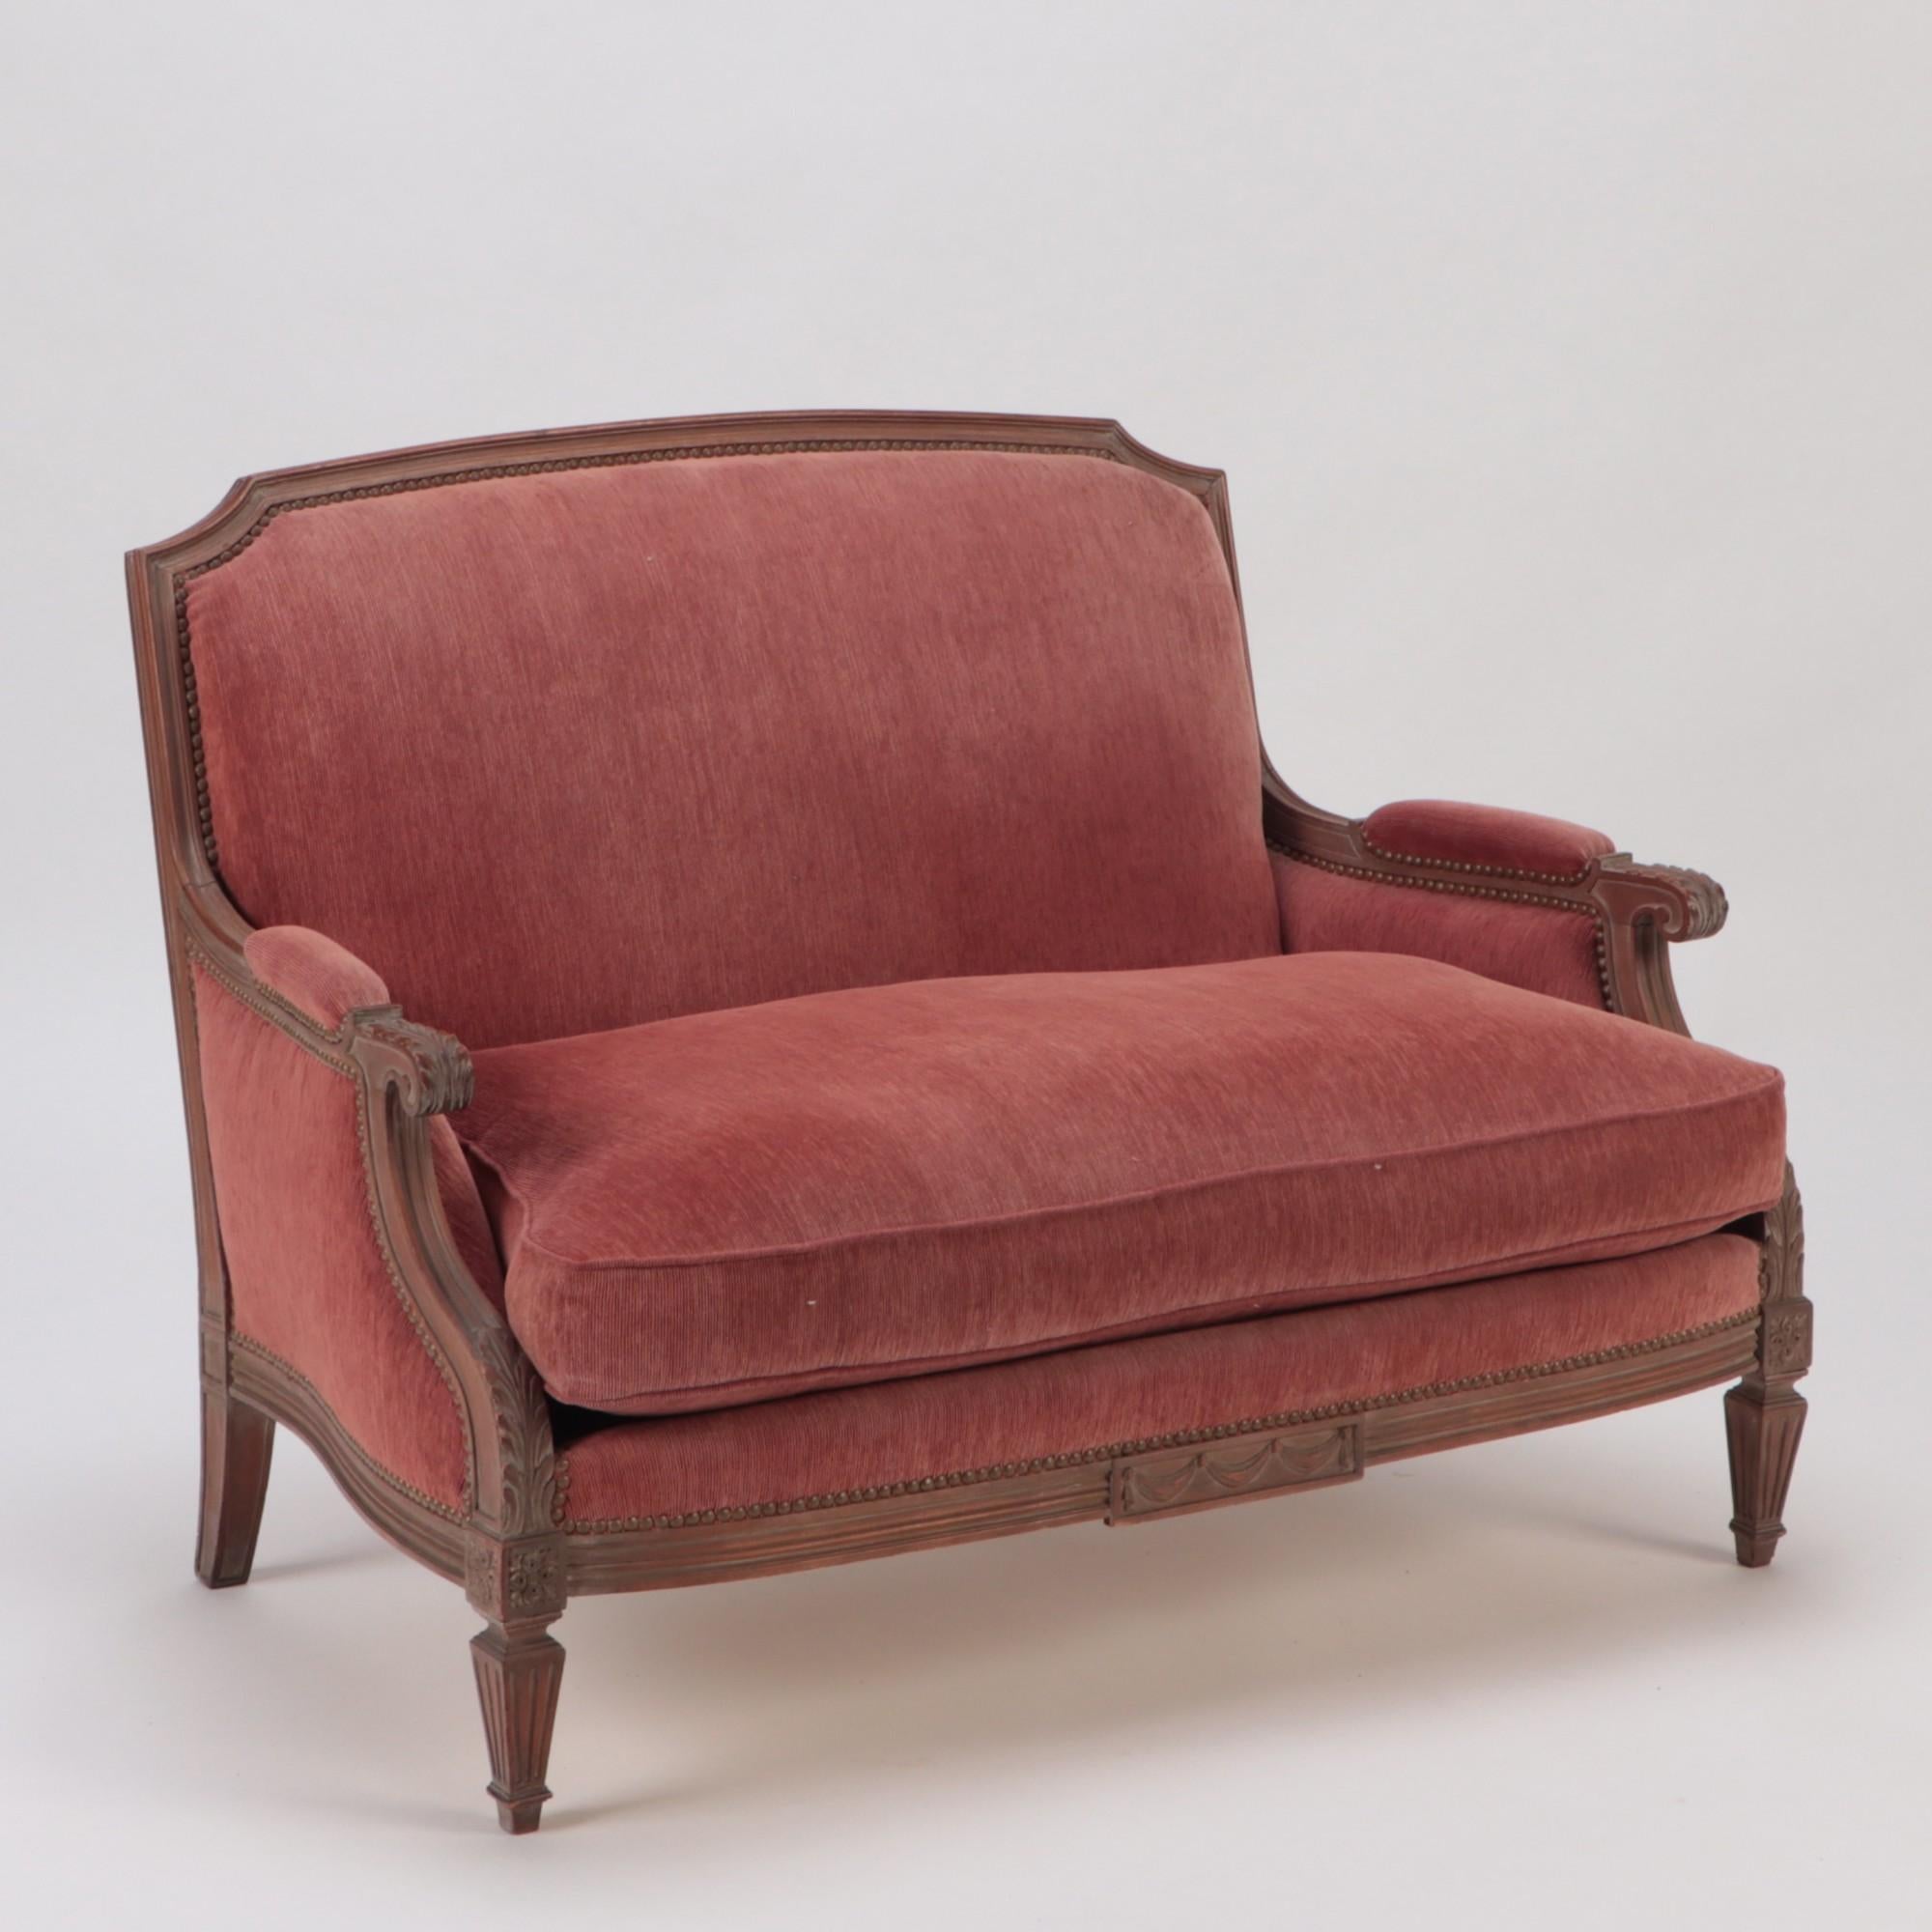 French Pair of Louis XVI Style Upholstered Marquises in Cerused Mahogany, circa 1940